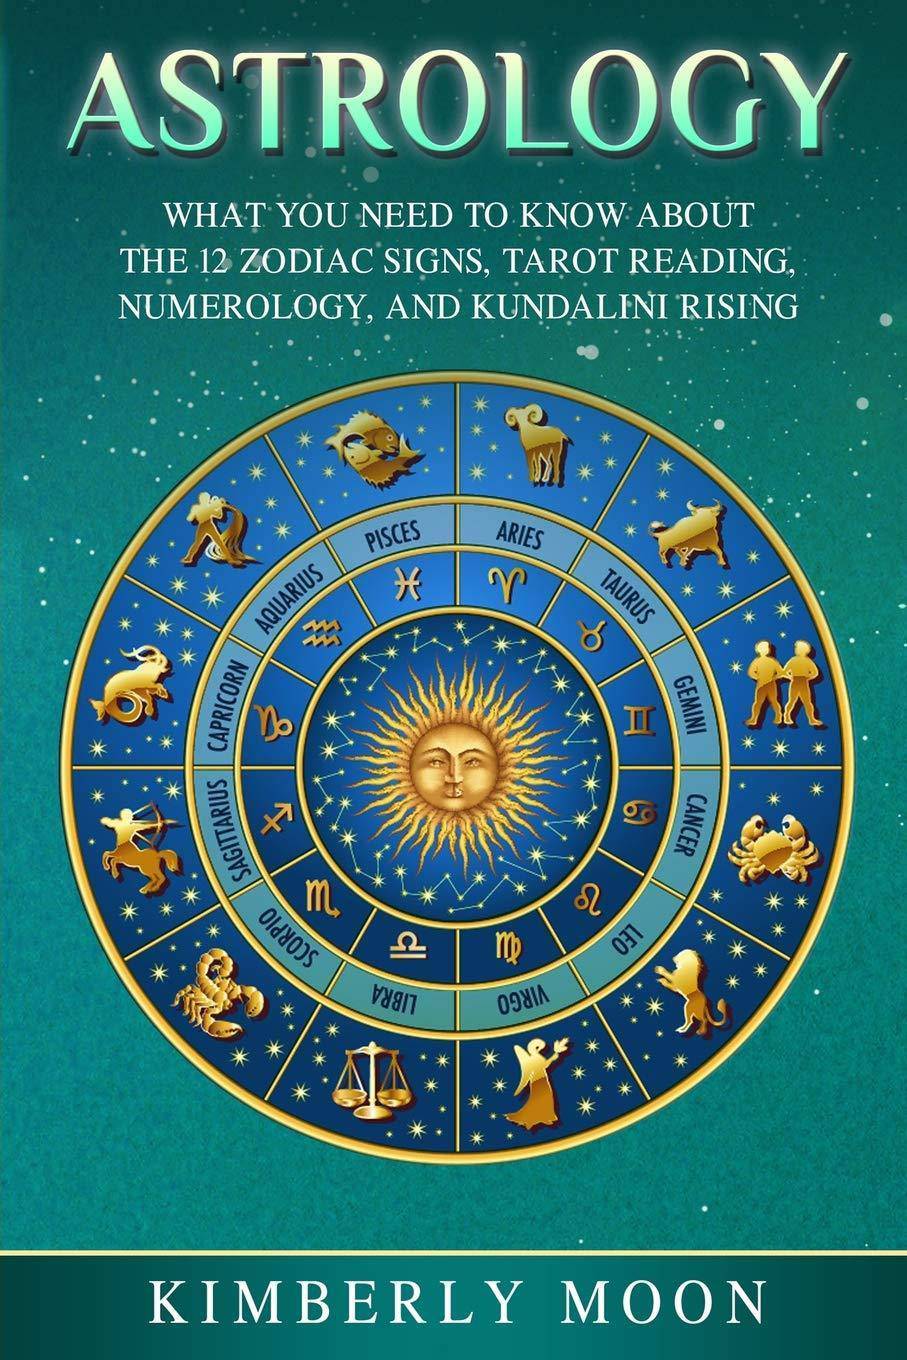 Astrology: What You Need to Know about the 12 Zodiac Signs, Taro - SureShot Books Publishing LLC